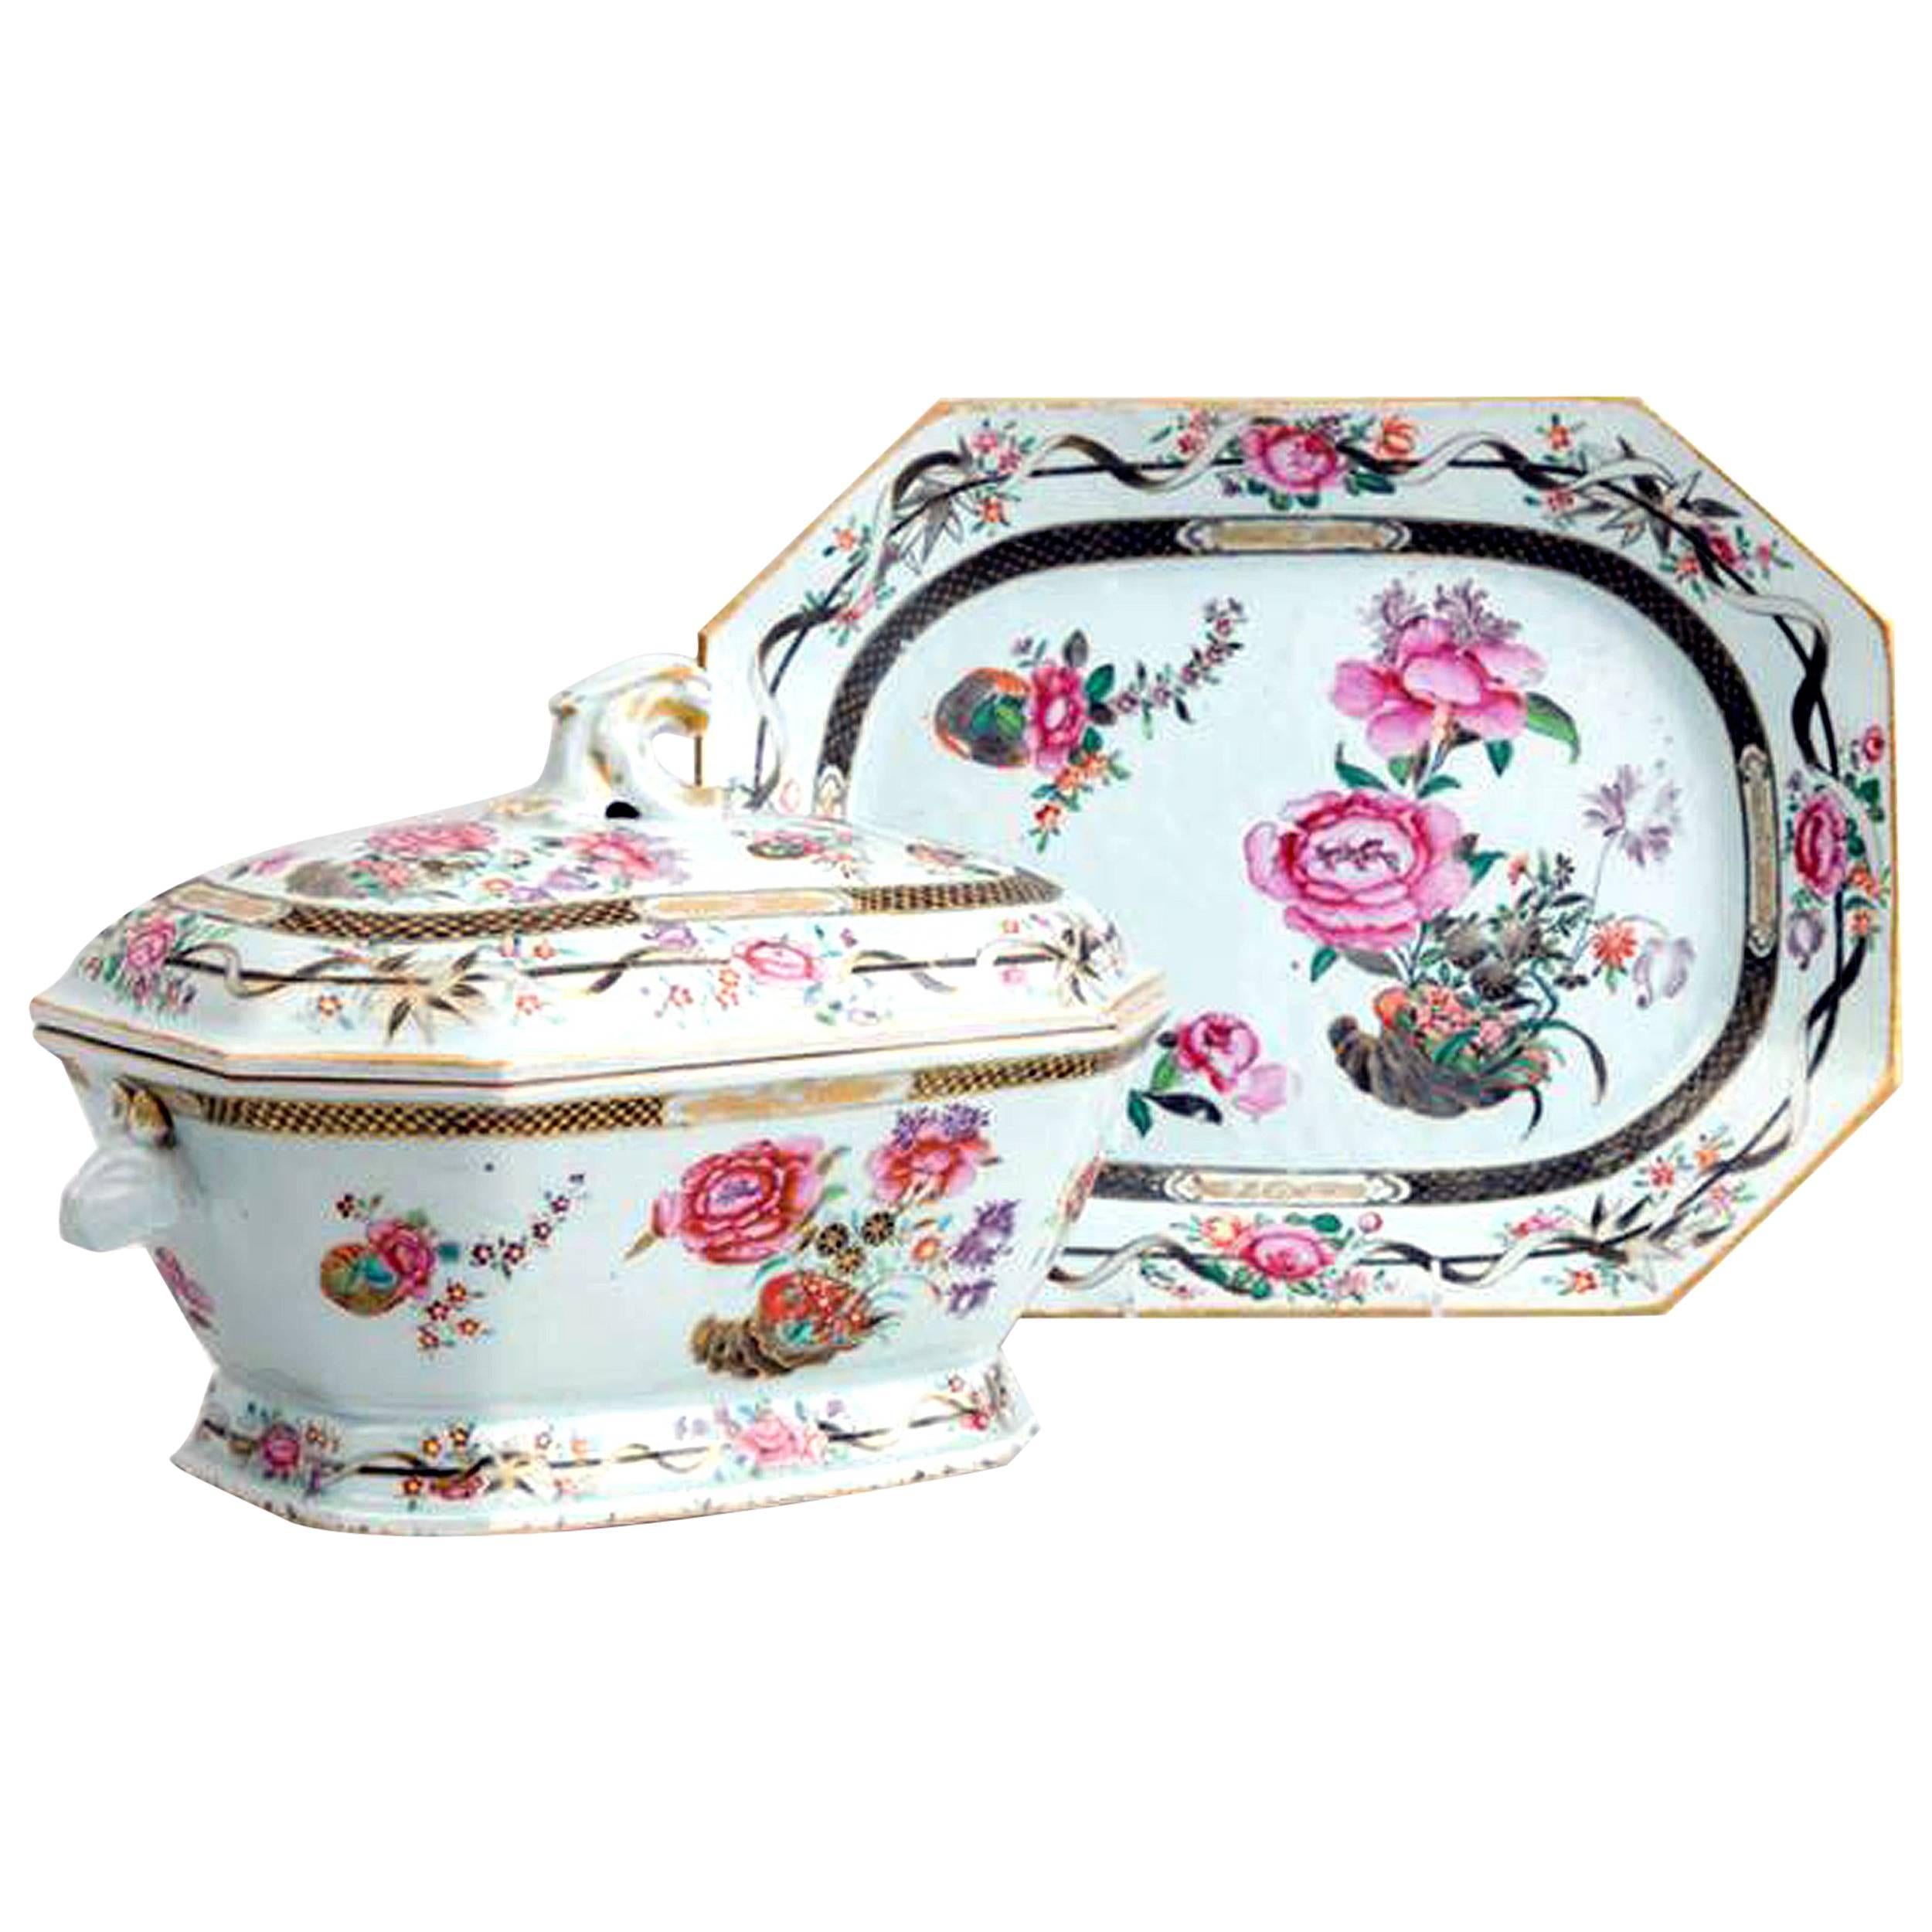 Chinese Export Porcelain Famille Rose Soup Tureen, Cover and Stand, Circa 1765